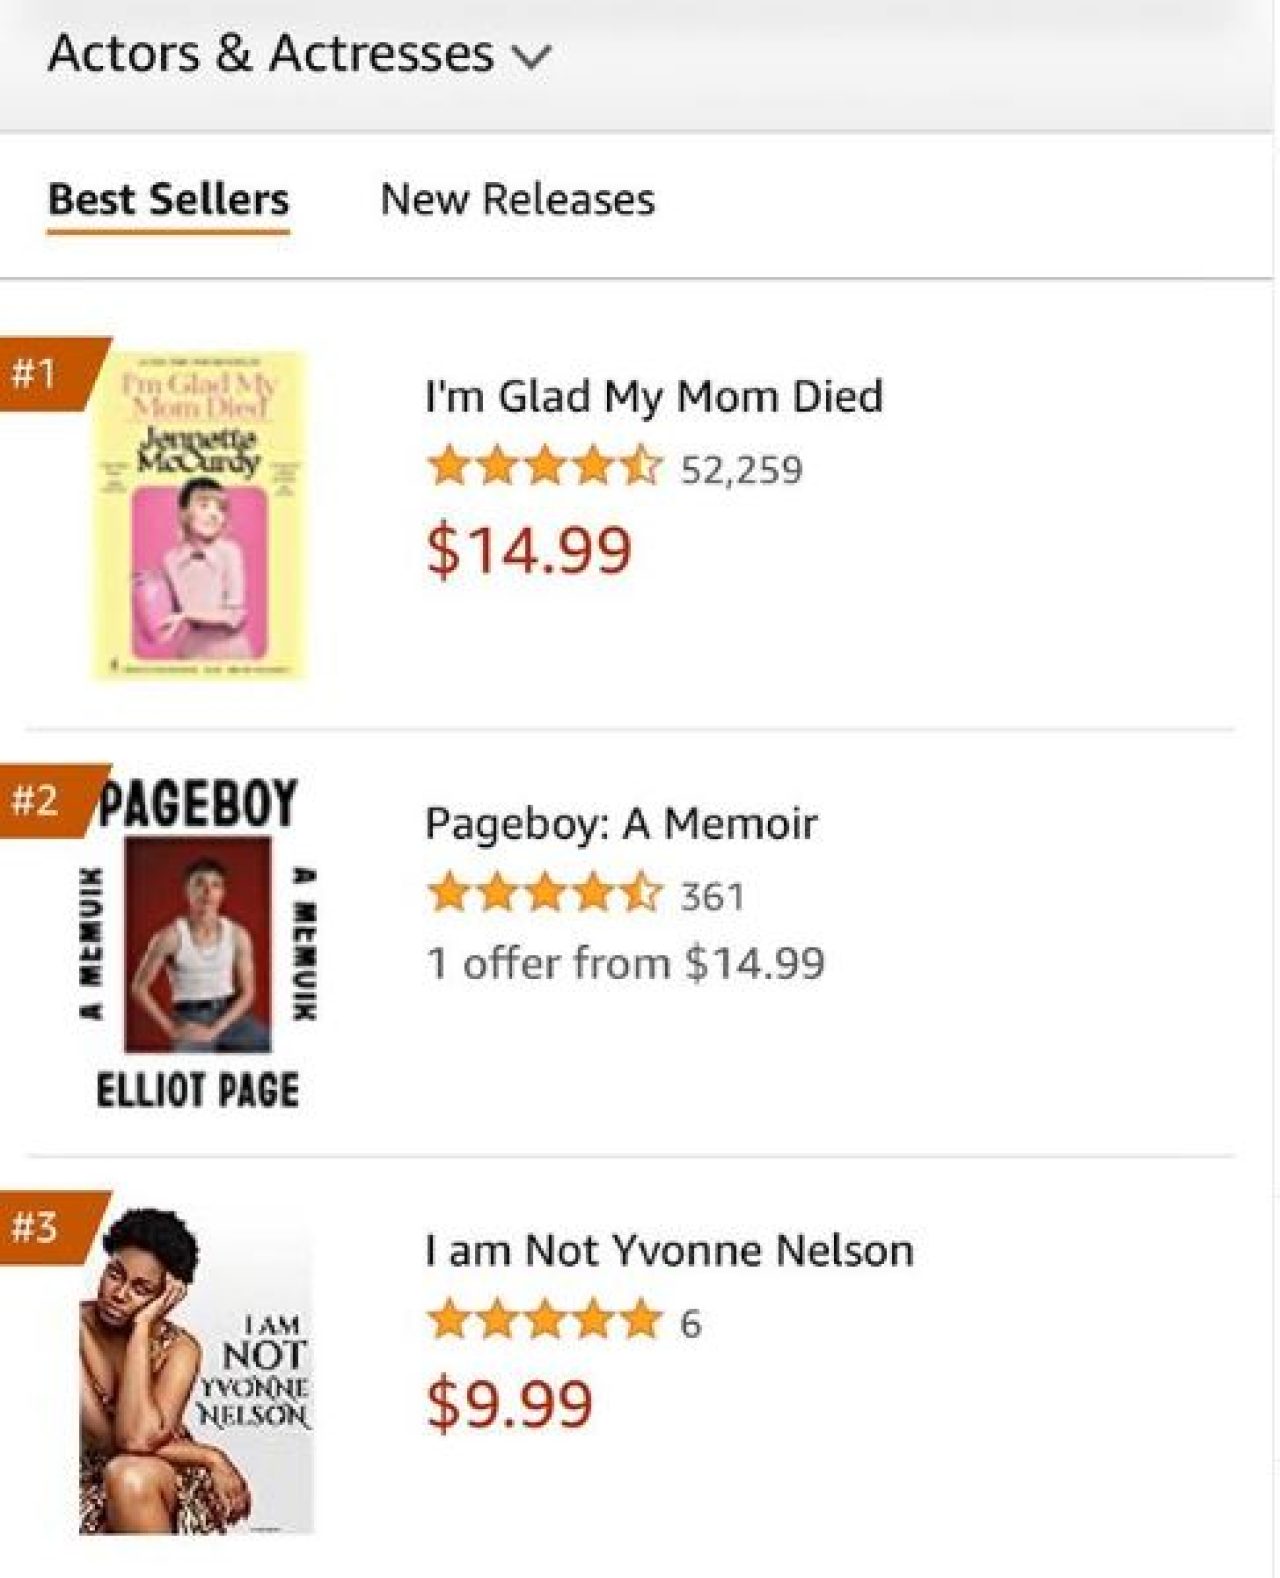 "I AM NOT YVONNE NELSON" Soars to #3 Bestseller on Amazon. Afro News Wire